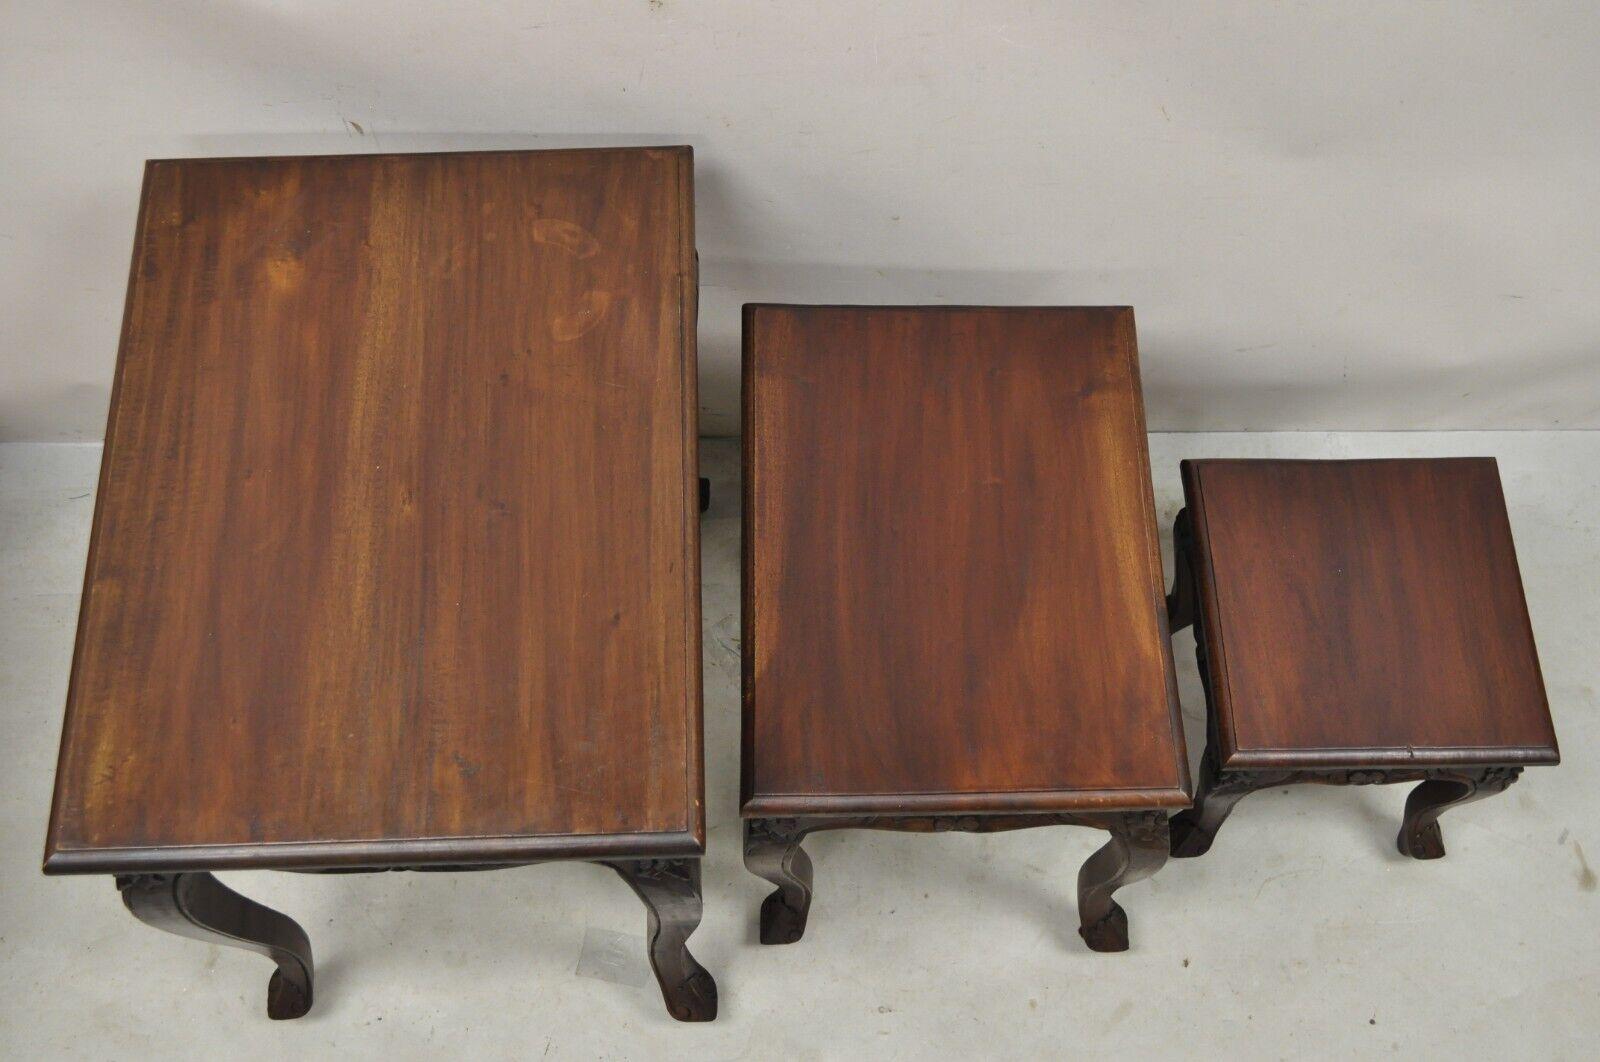 Vintage French Rococo Style Mahogany Nesting Side Tables - Set of 3 For Sale 1